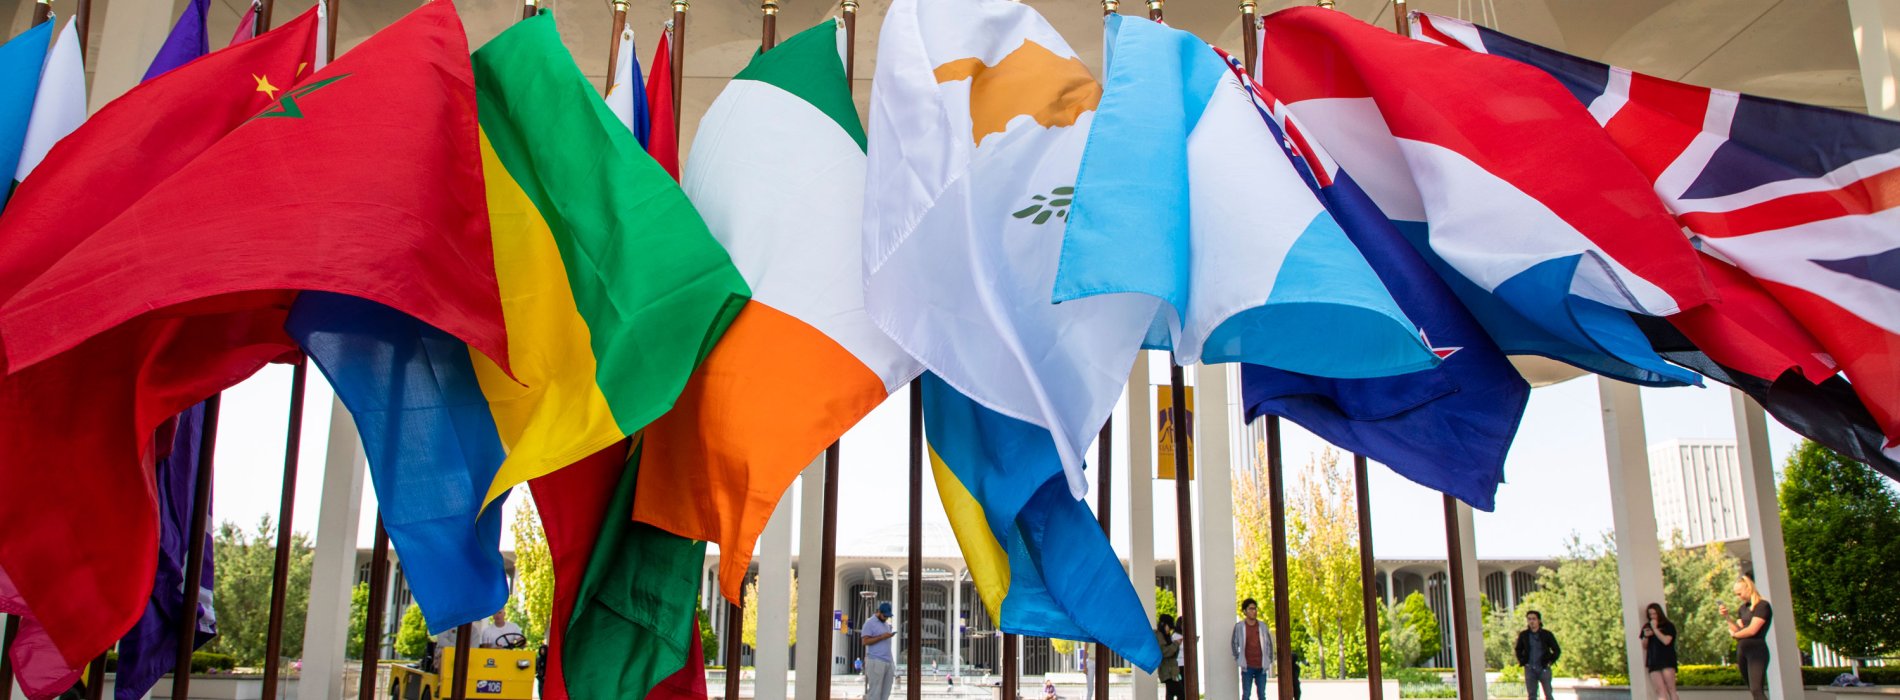 Flags of many nations fly before the University at Albany Podium complex.